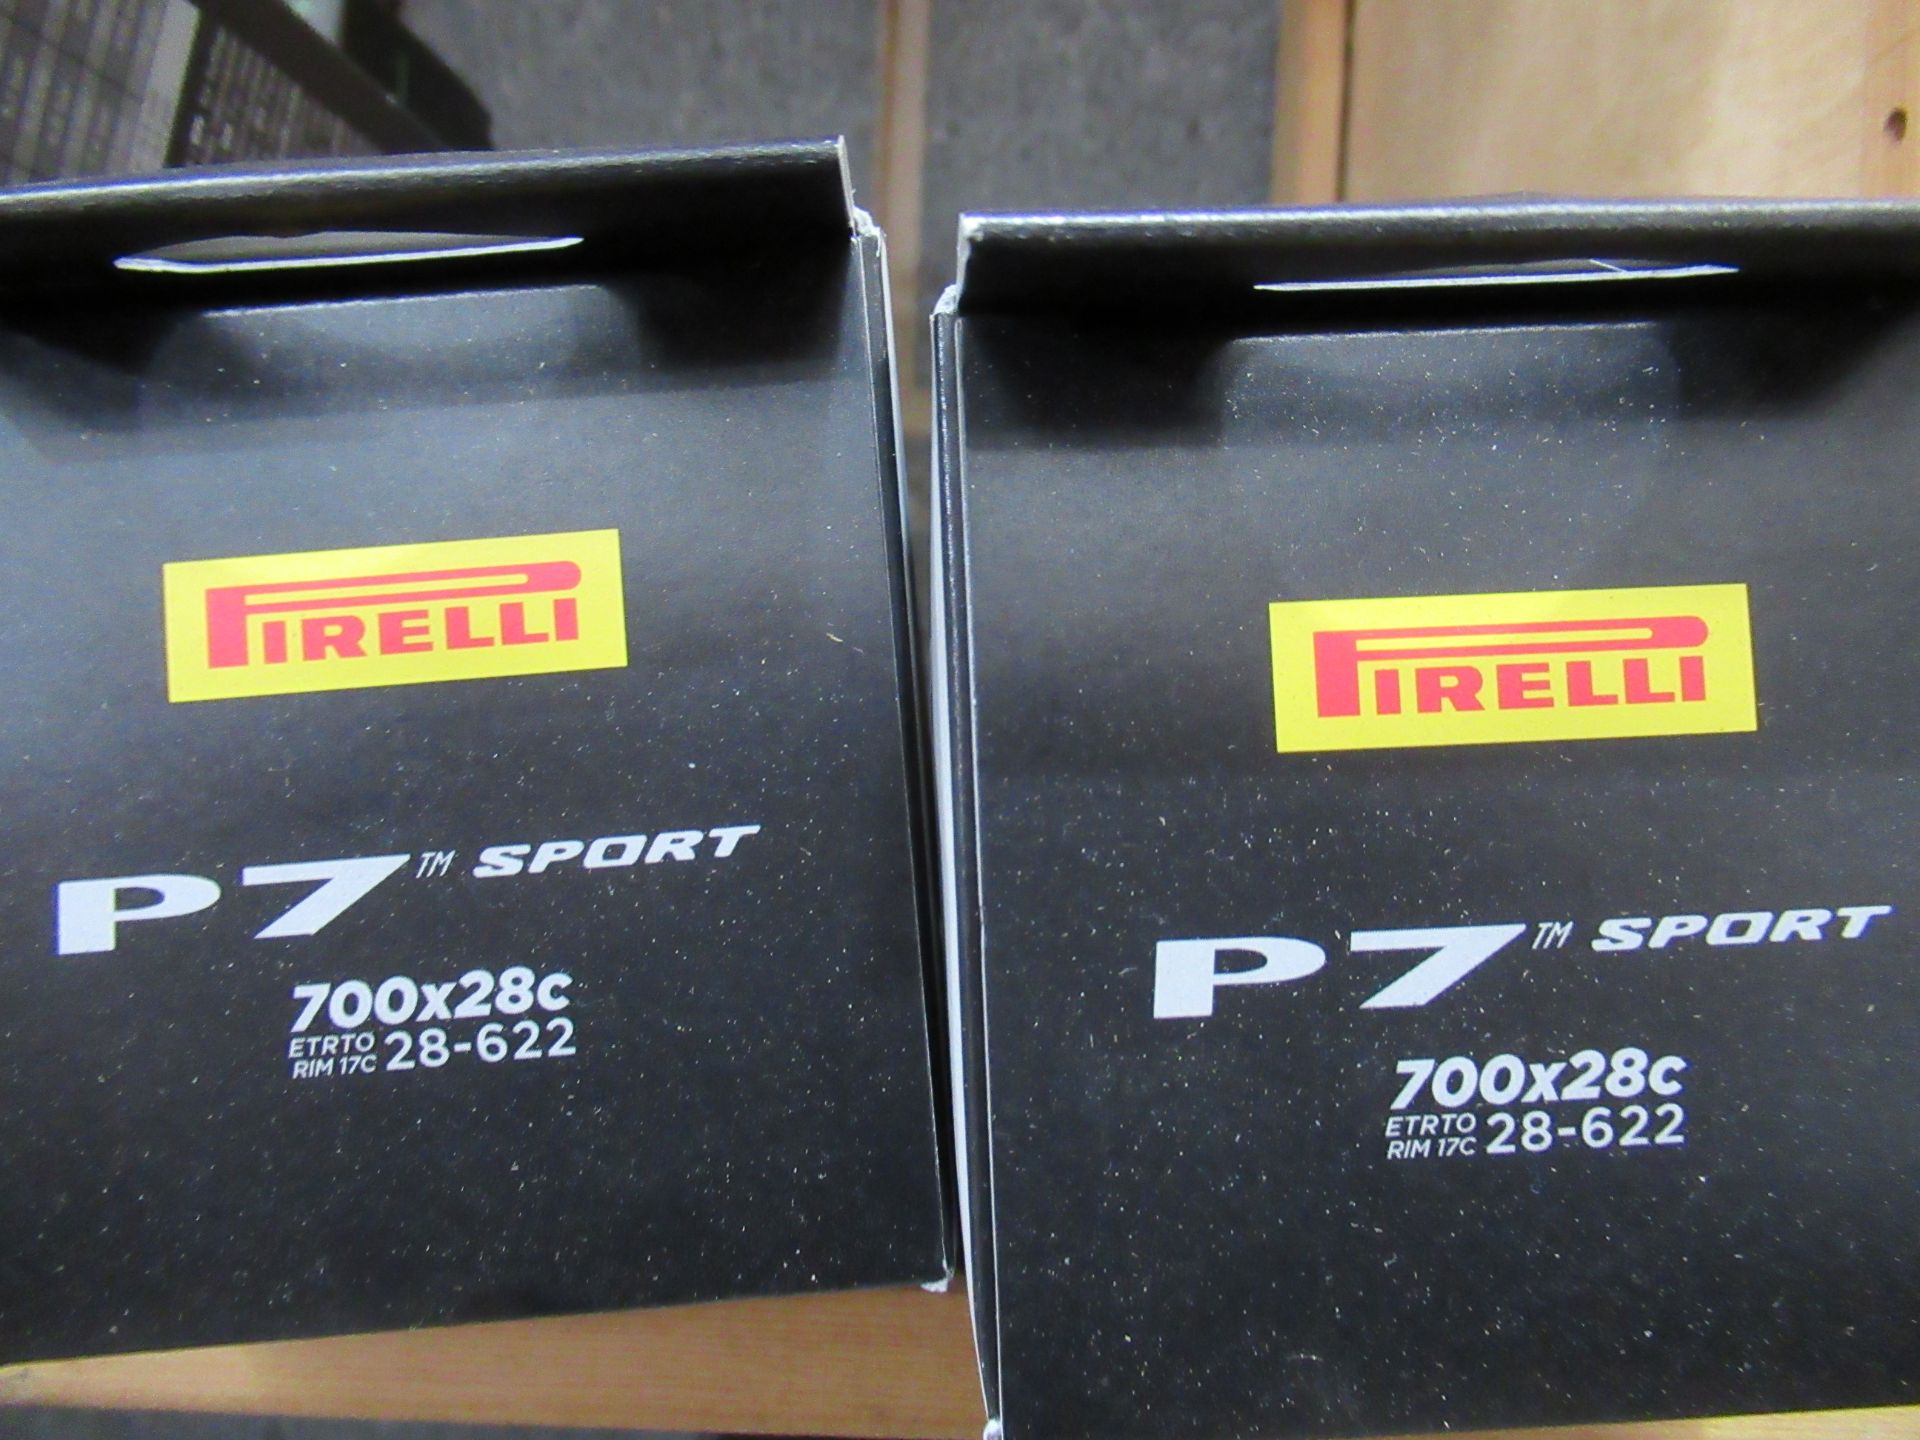 6 x Pirelli P7 Sport tyres - 2 x 700x24c (RRP£27.99 each); 2 x 700x26c (RRP£28.99 each) and 2 x 700x - Image 4 of 4